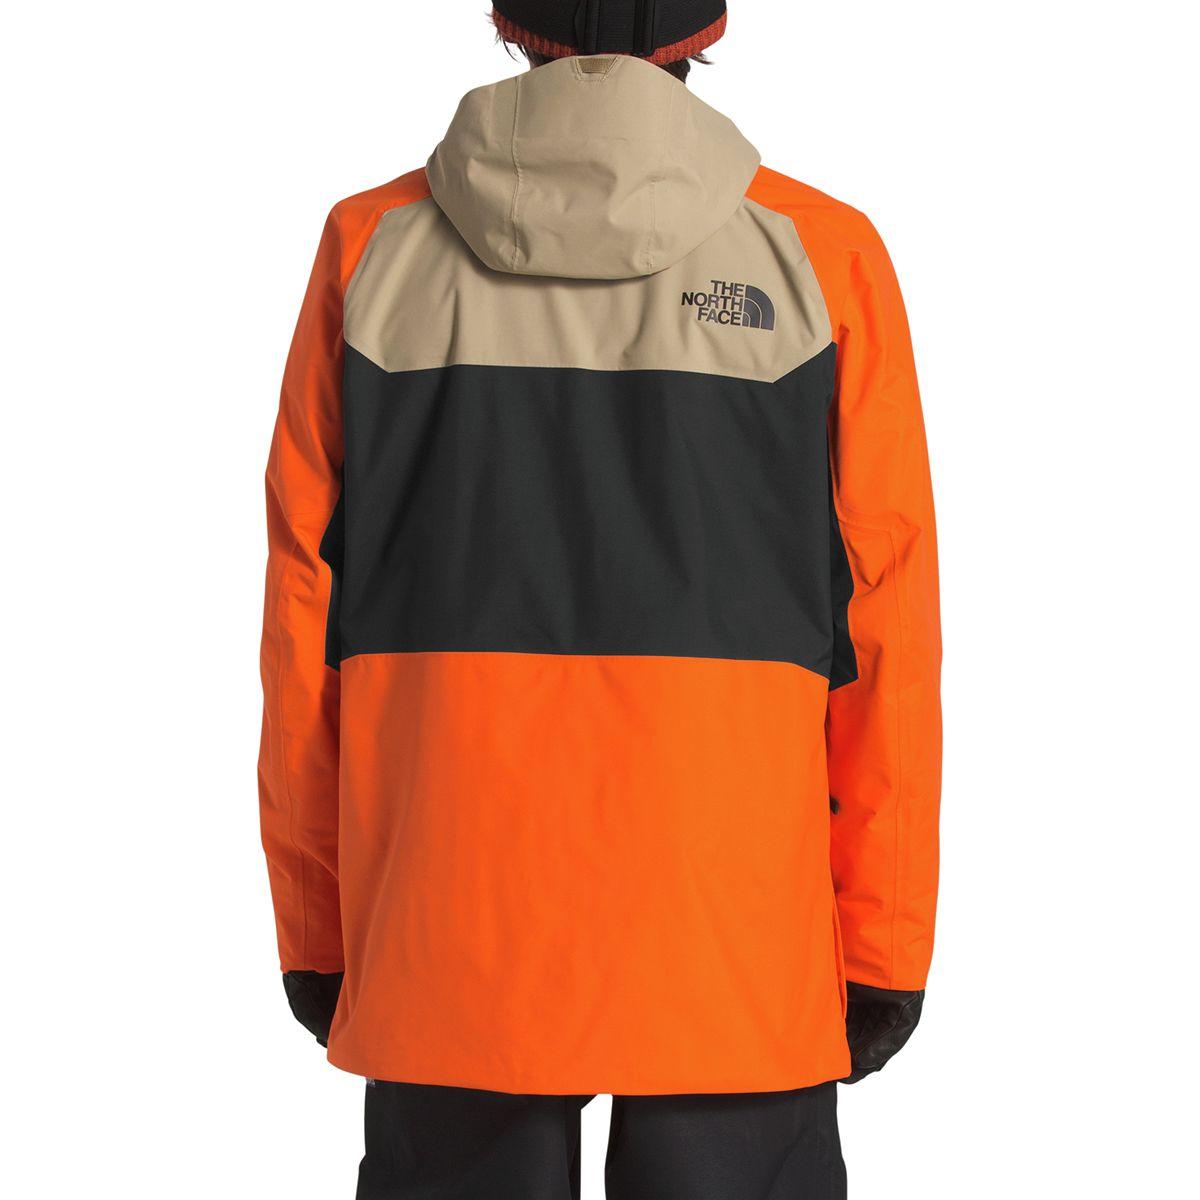 The North Face Synthetic Repko Hooded Jacket in Orange for Men - Lyst